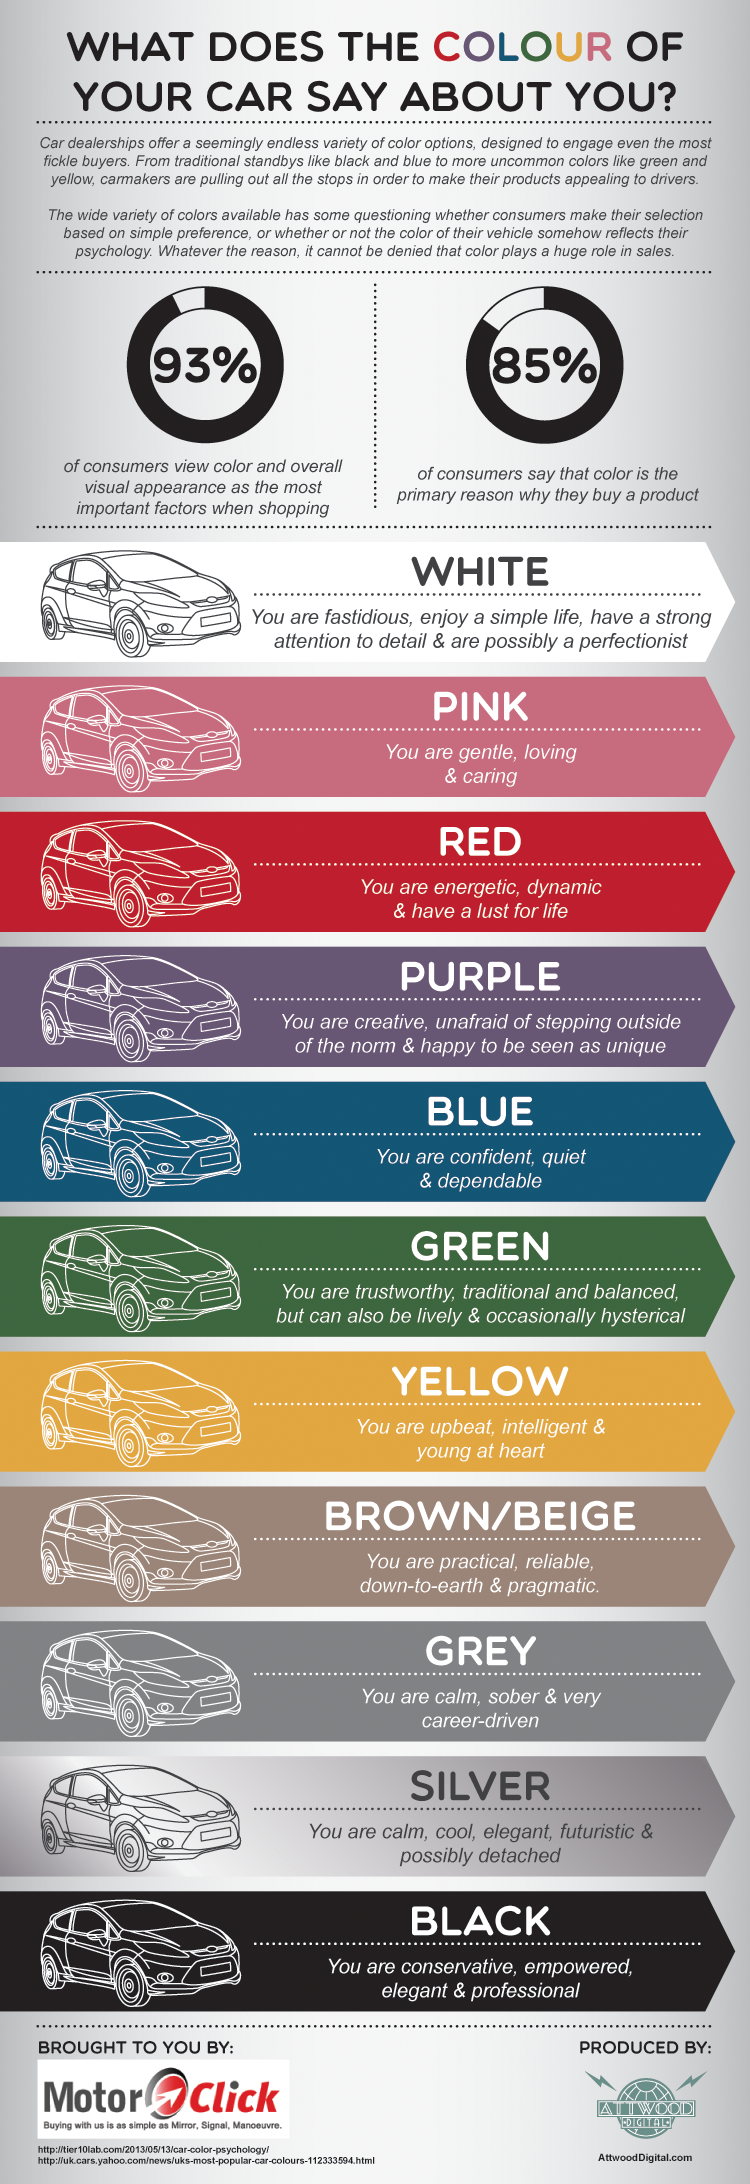 What-Does-Your-Car-Color-Say.png